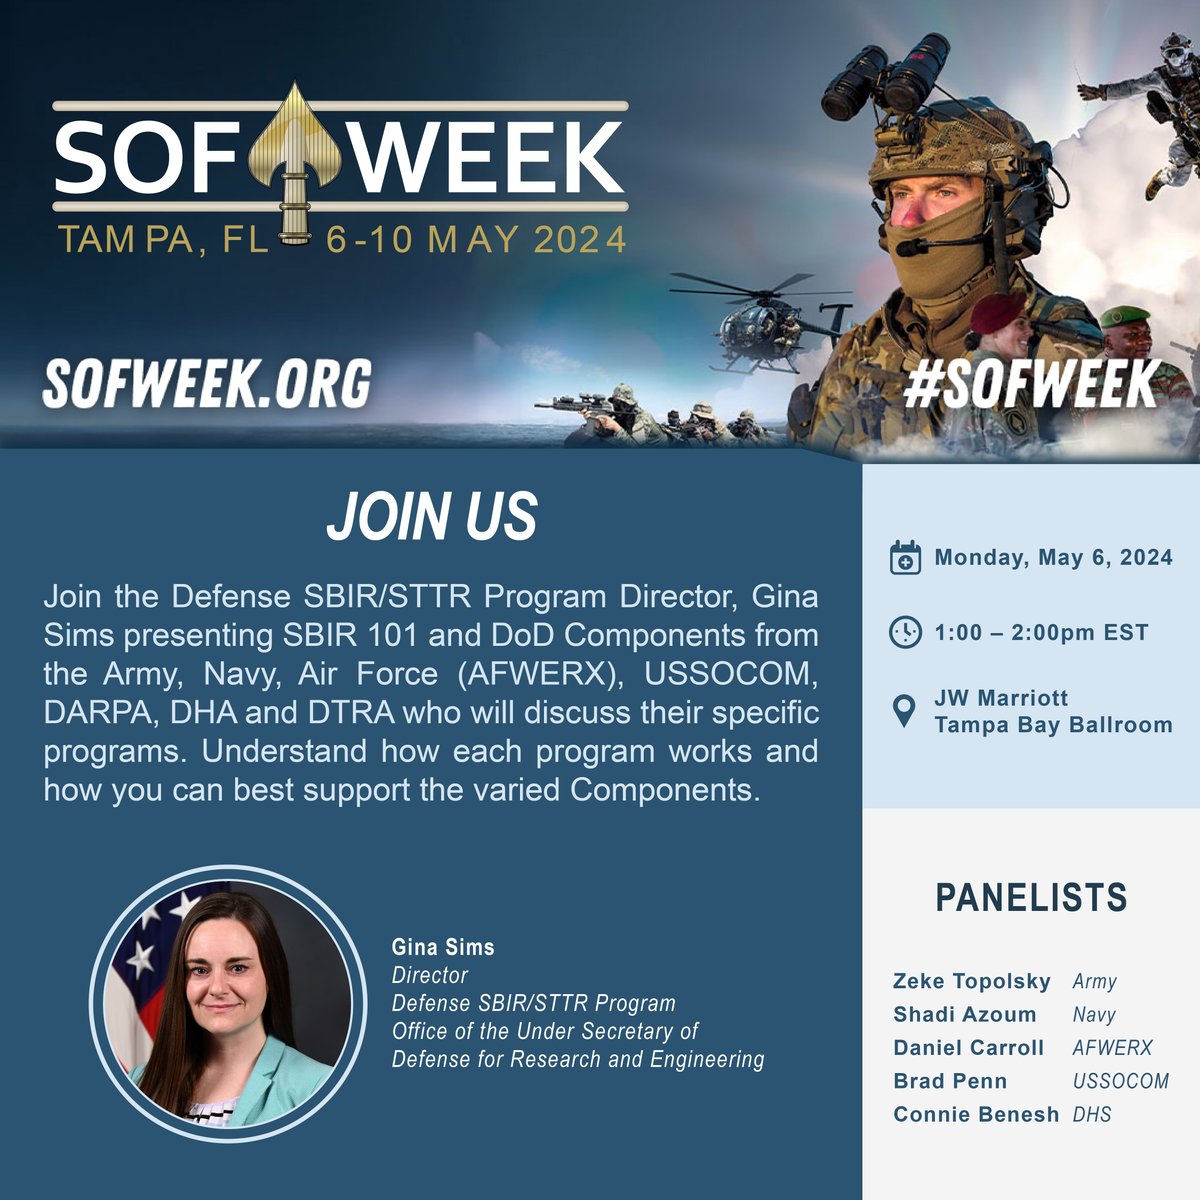 Happening soon! If you're at SOF WEEK and want to learn more about DoD SBIR/STTR Programs, join Gina Sims, Director, DoD SBIR/STTR Program and Components from the Army, Navy, Air Force, USSOCOM and DHS at 1:00 pm, join us in the Tampa Bay Ballroom! #DoDInnovates #SOFWEEK2024